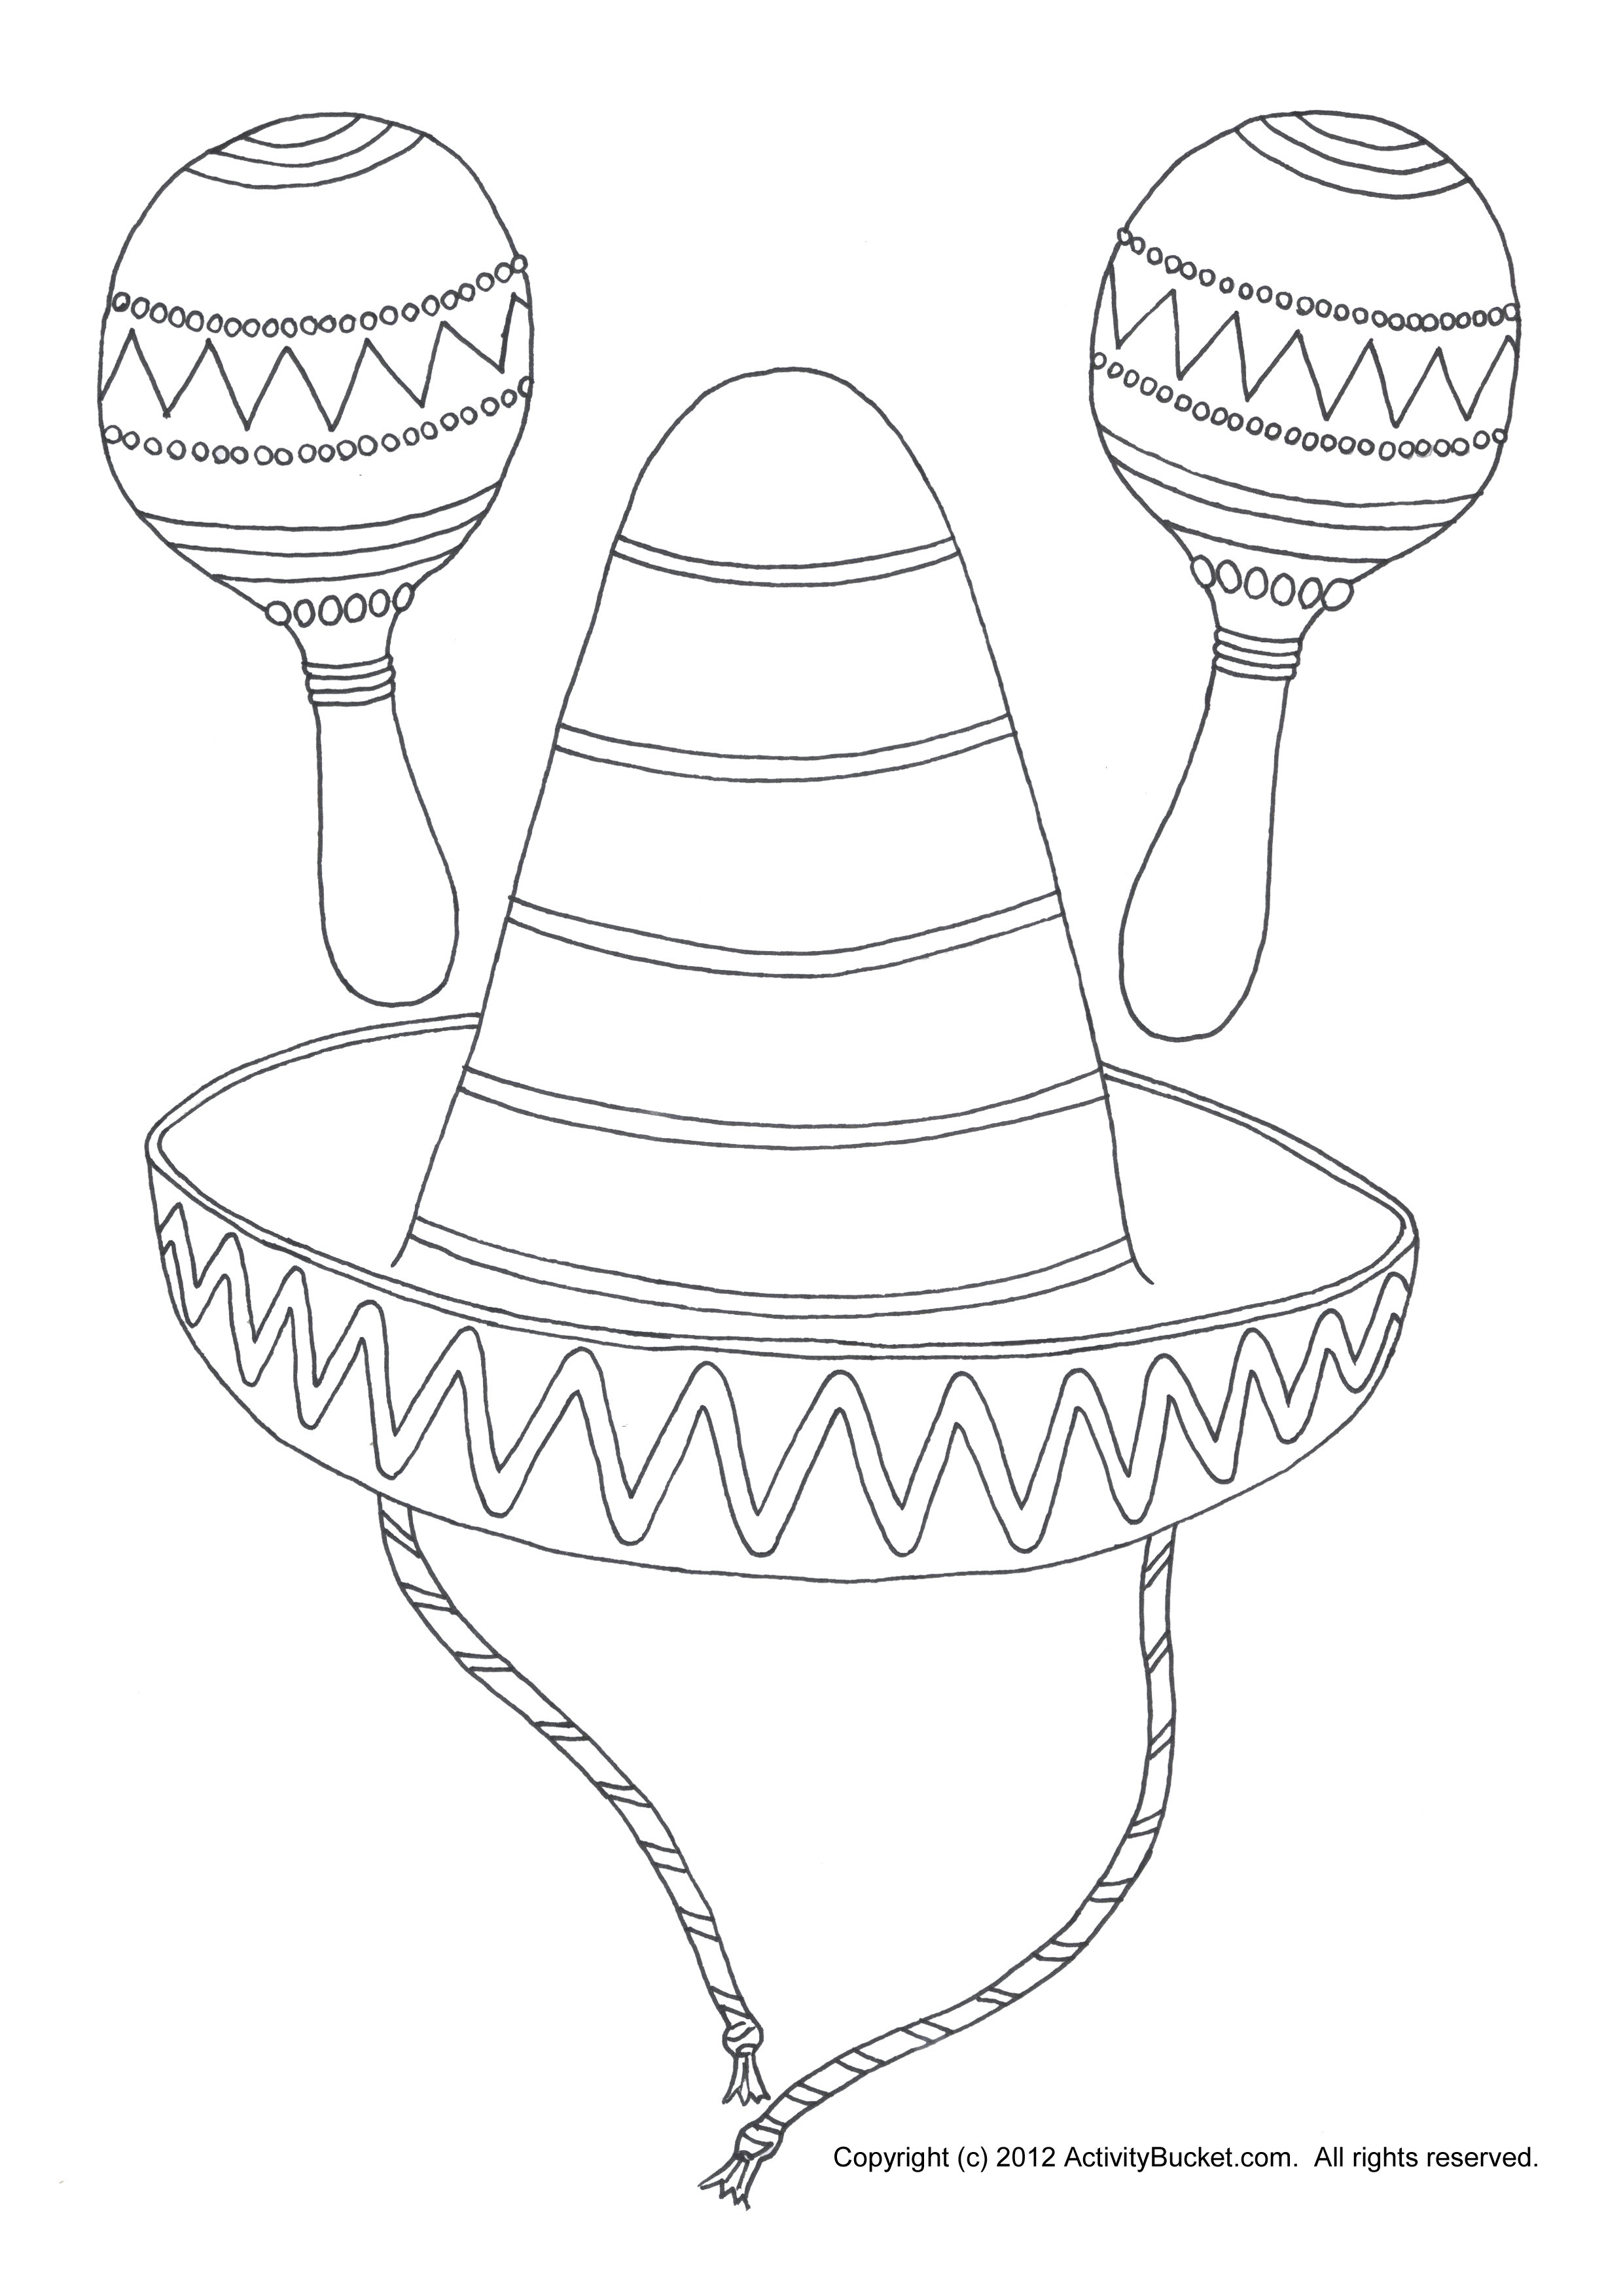 sombrero-printable-template-these-could-be-used-when-celebrating-cinco